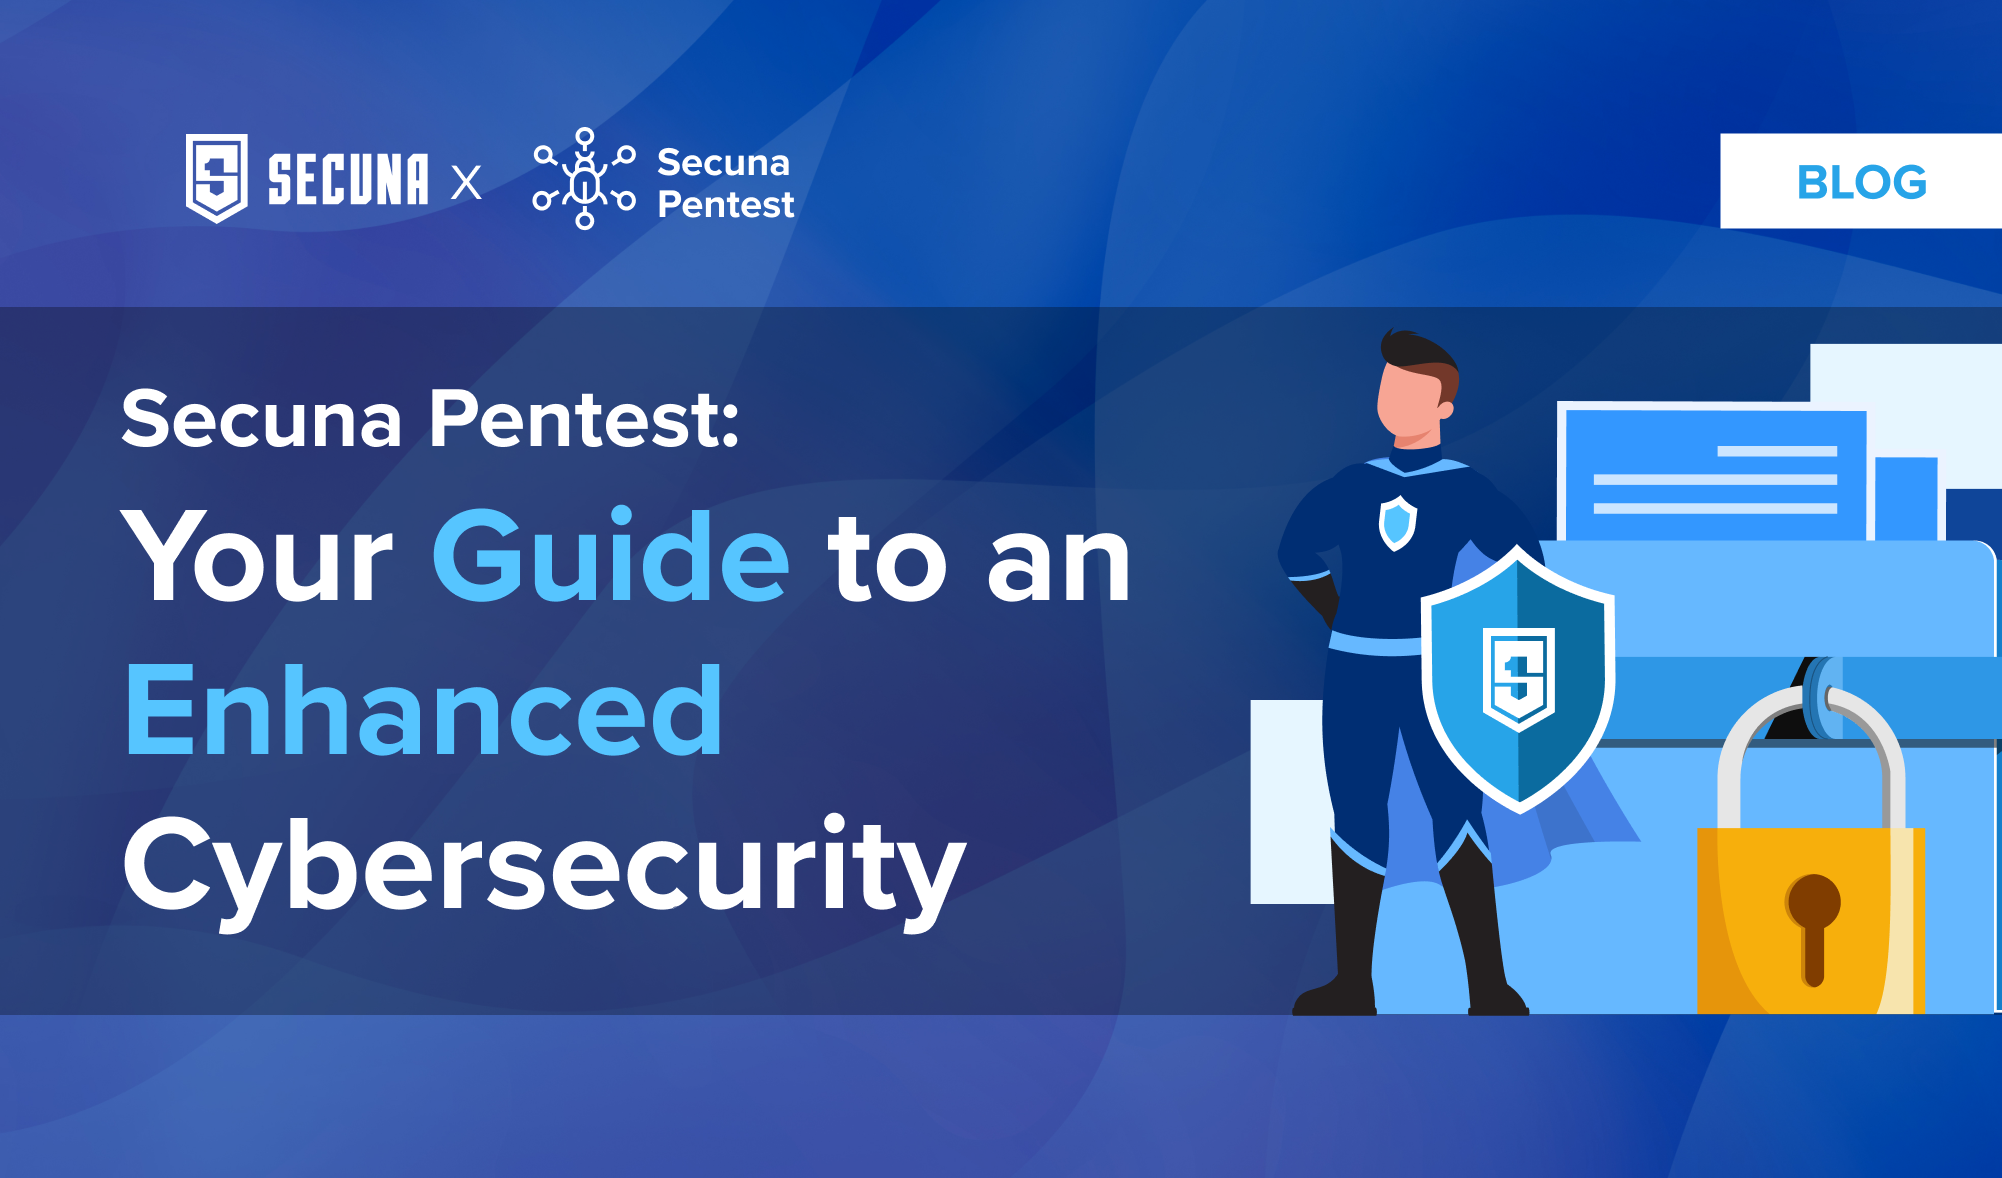 Secuna Pentest: Your Guide to an Enhanced Cybersecurity